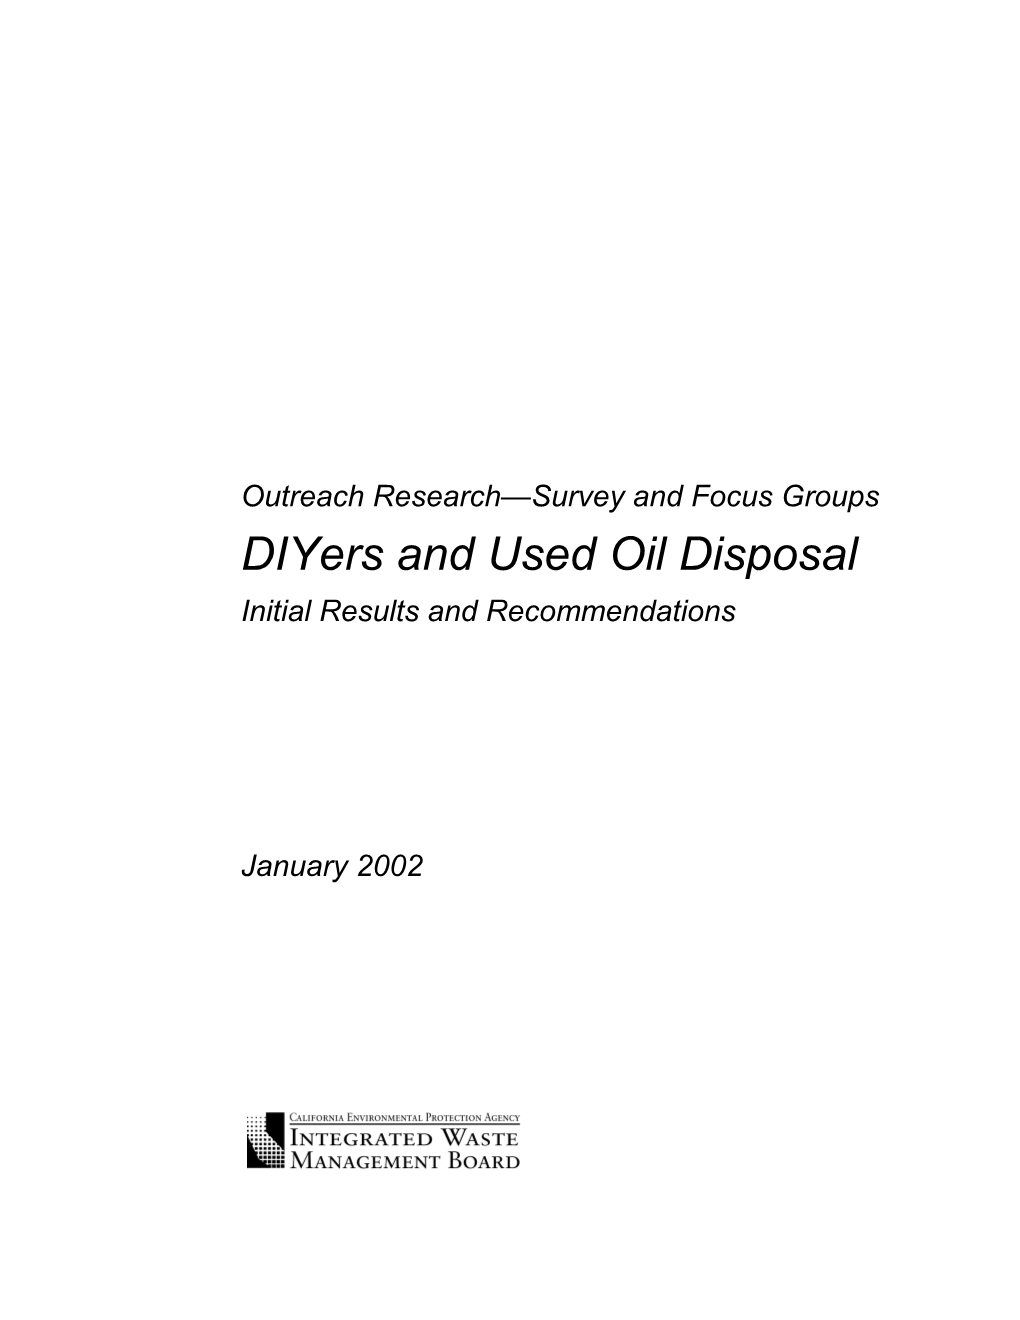 Outreach Research Survey and Focus Groups: Diyers and Used Oil Disposal, Initial Results